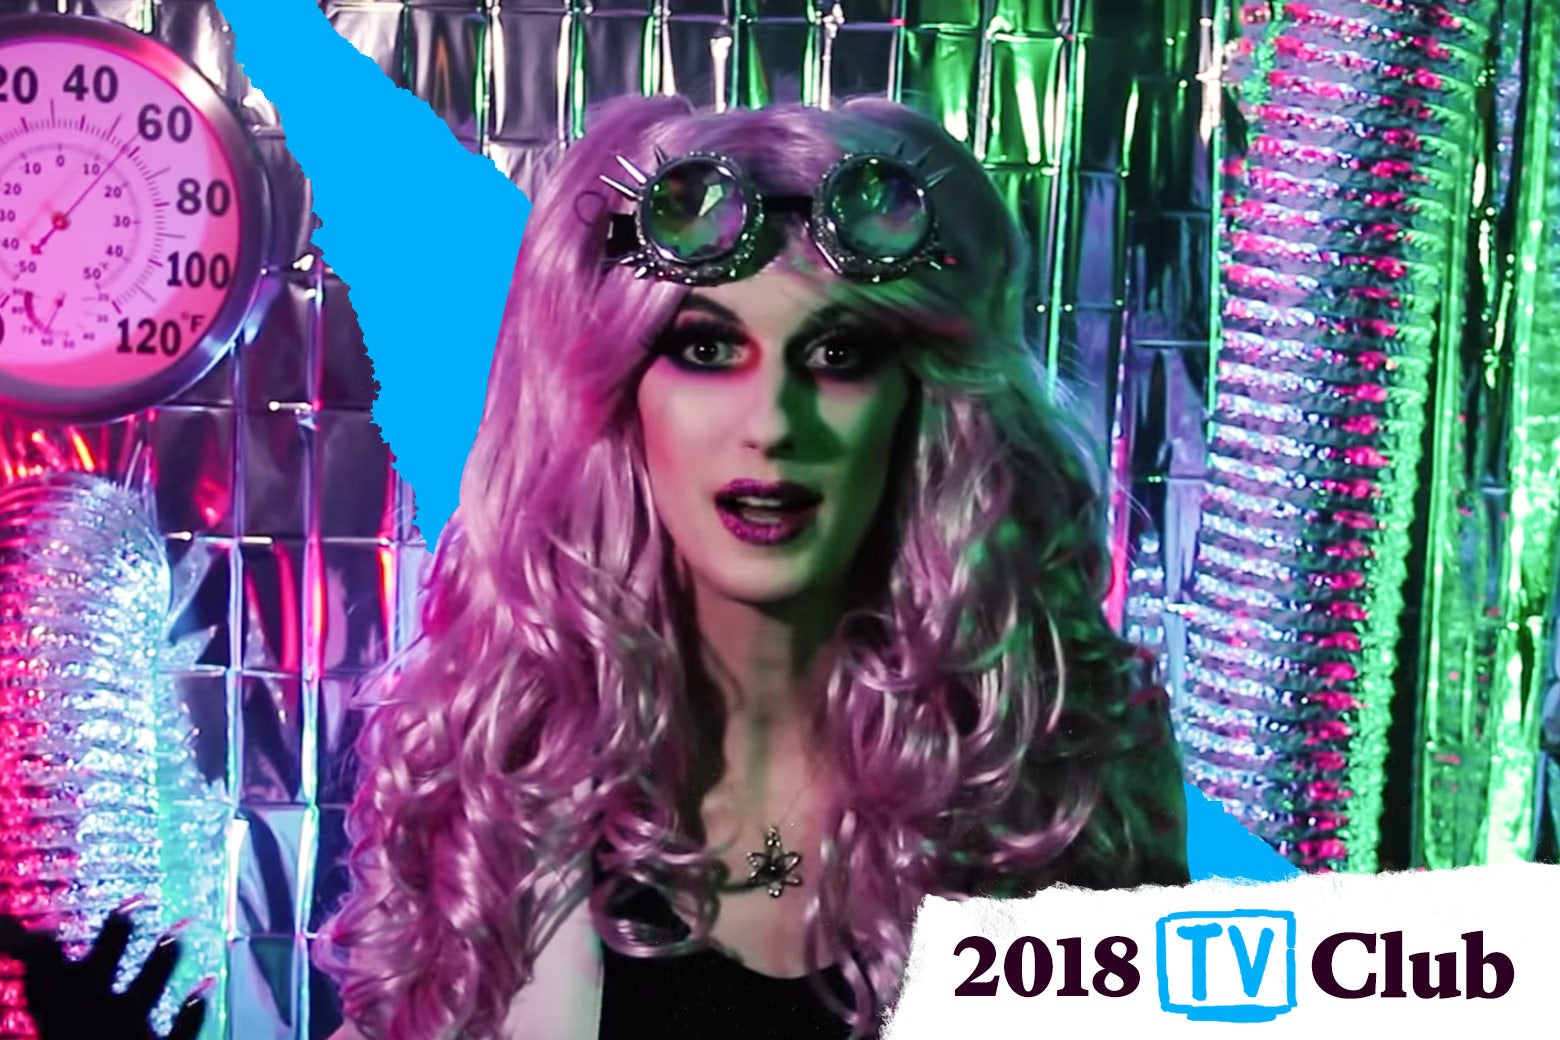 Screenshot of ContraPoints with TV club logo